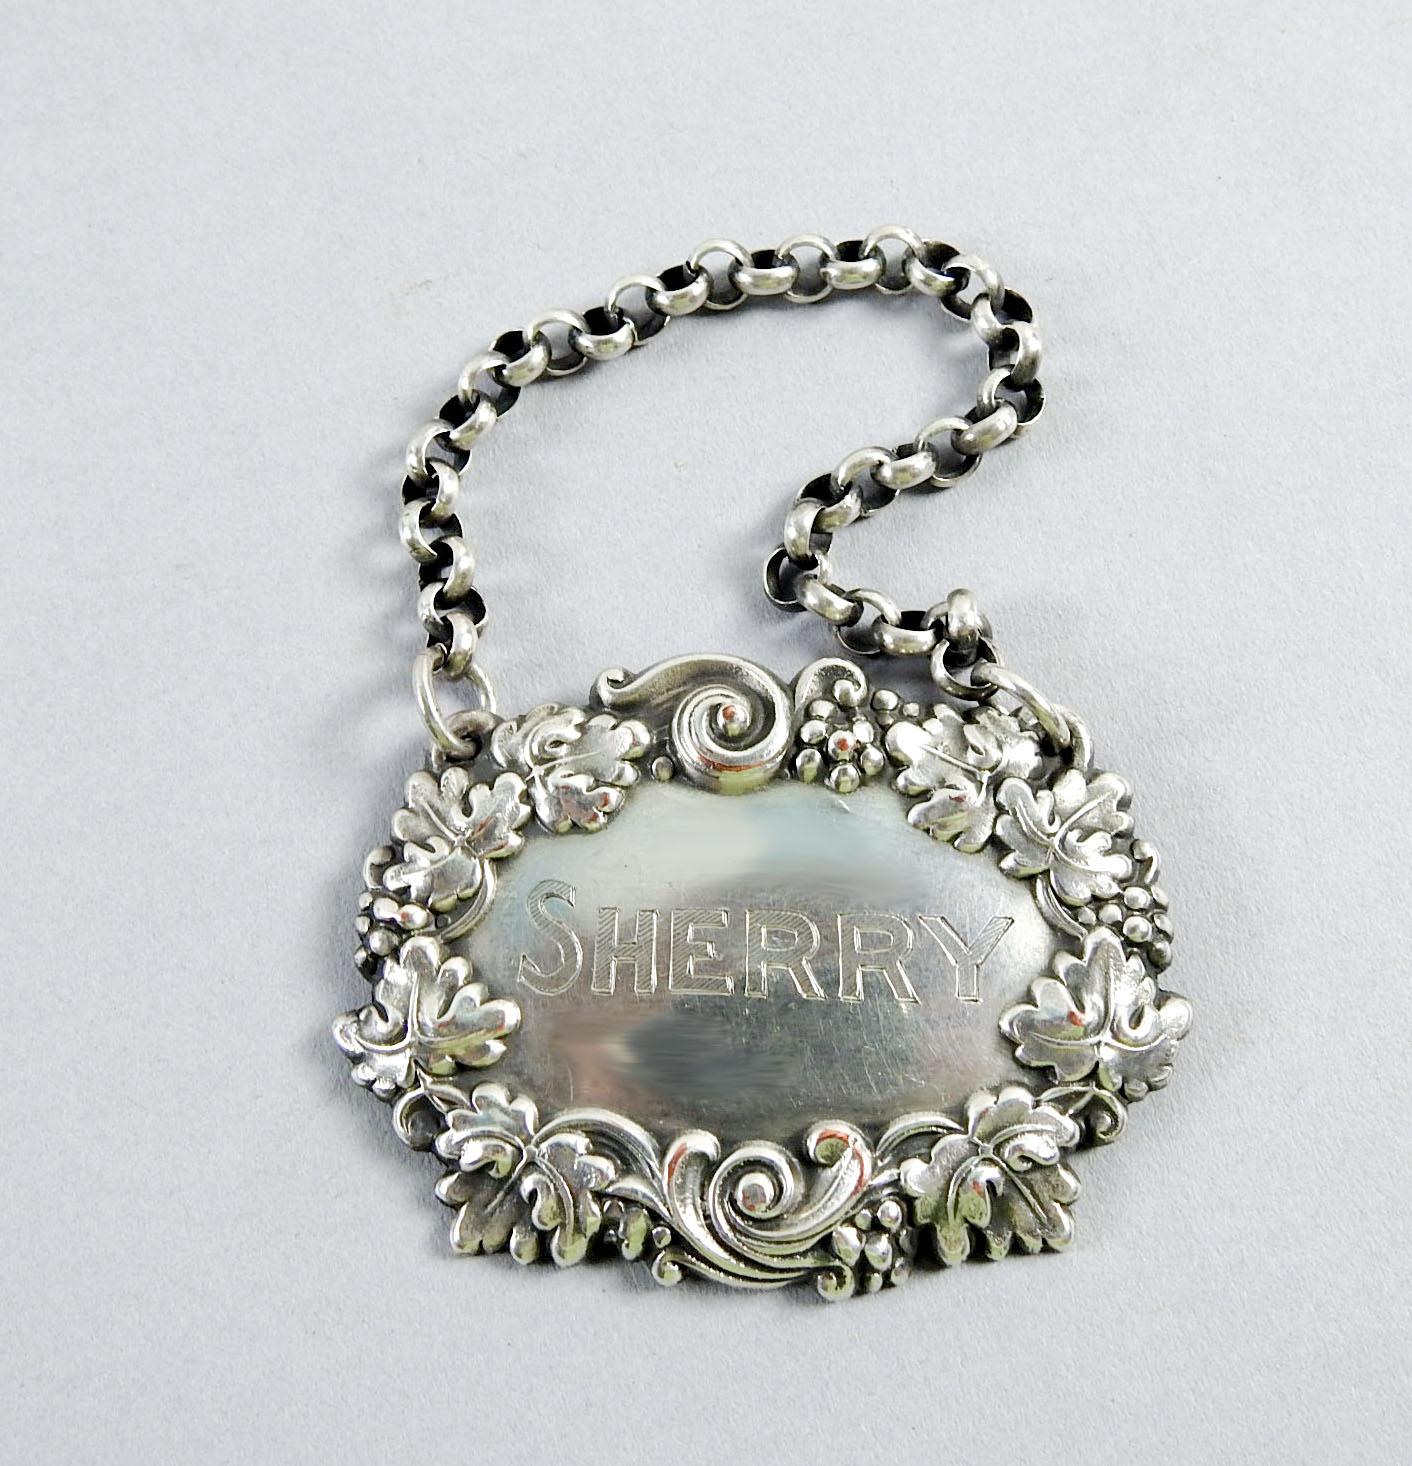 Vintage silverplate over copper hanging liquor tag engraved Sherry. Grape and grape leaf repousse design, marked Ster., however under lying copper can be seen in a couple spots, surface scuffing.